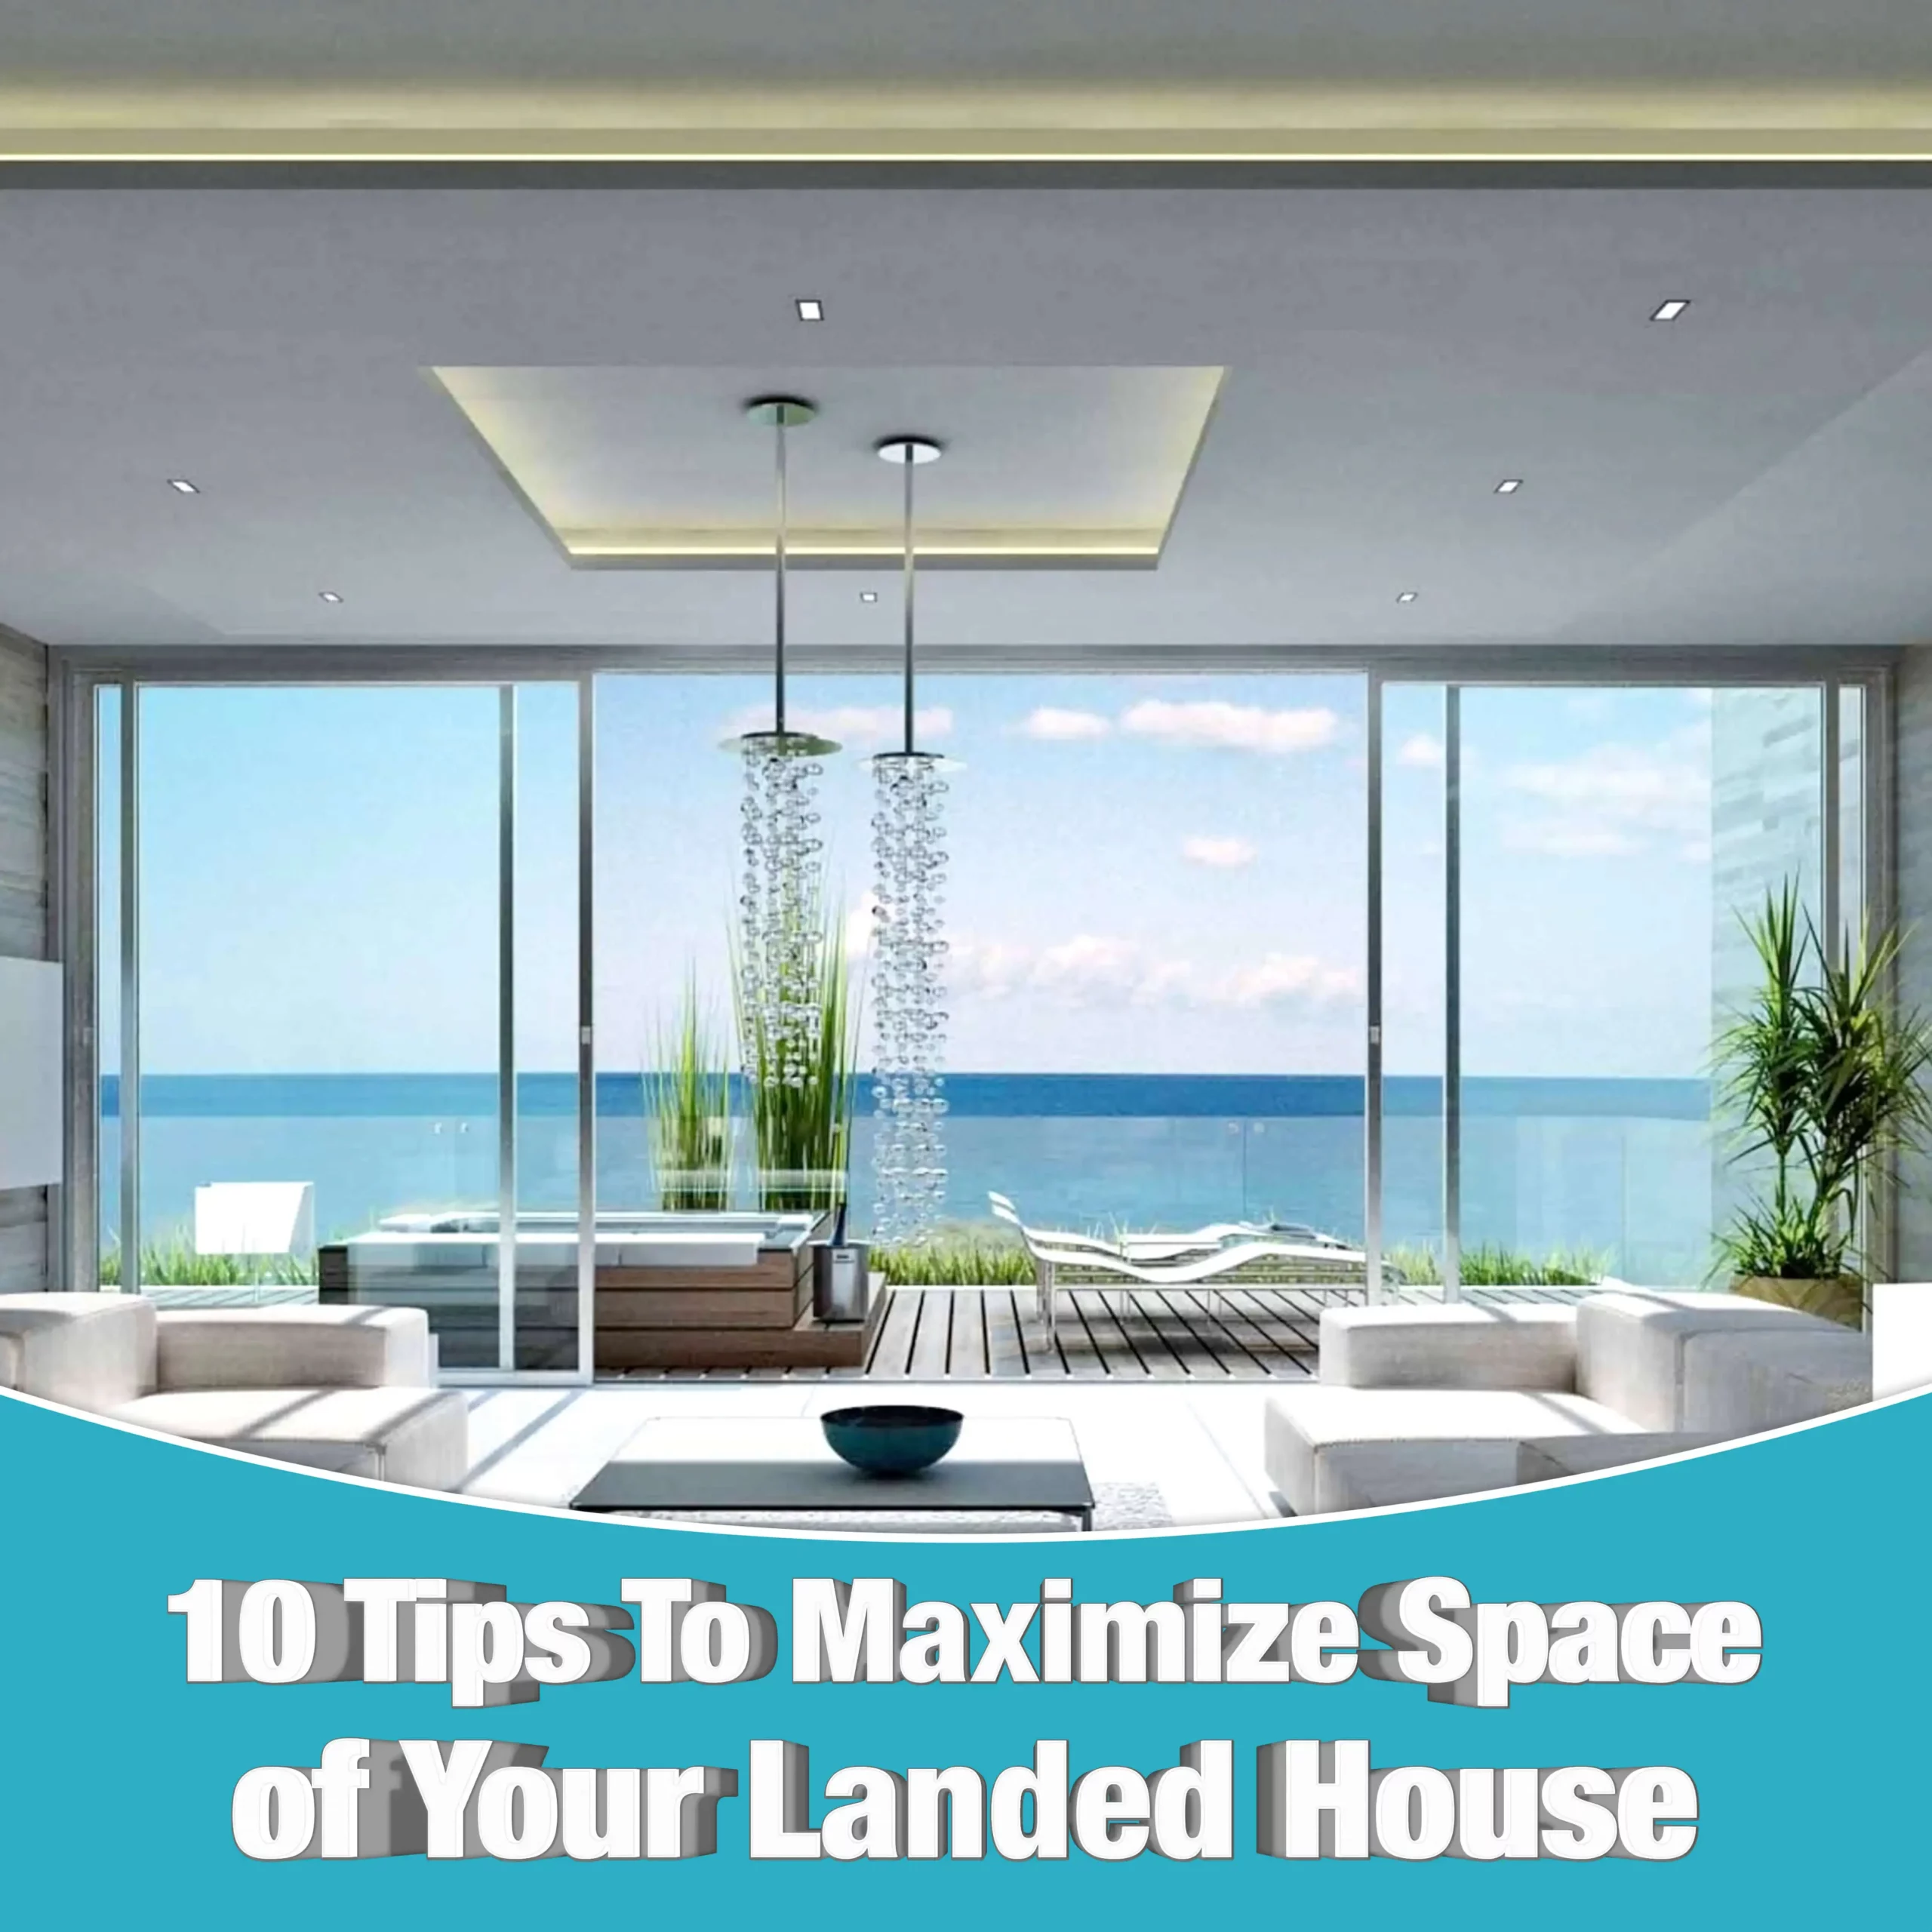 10 Tips To maximize space of your landed house